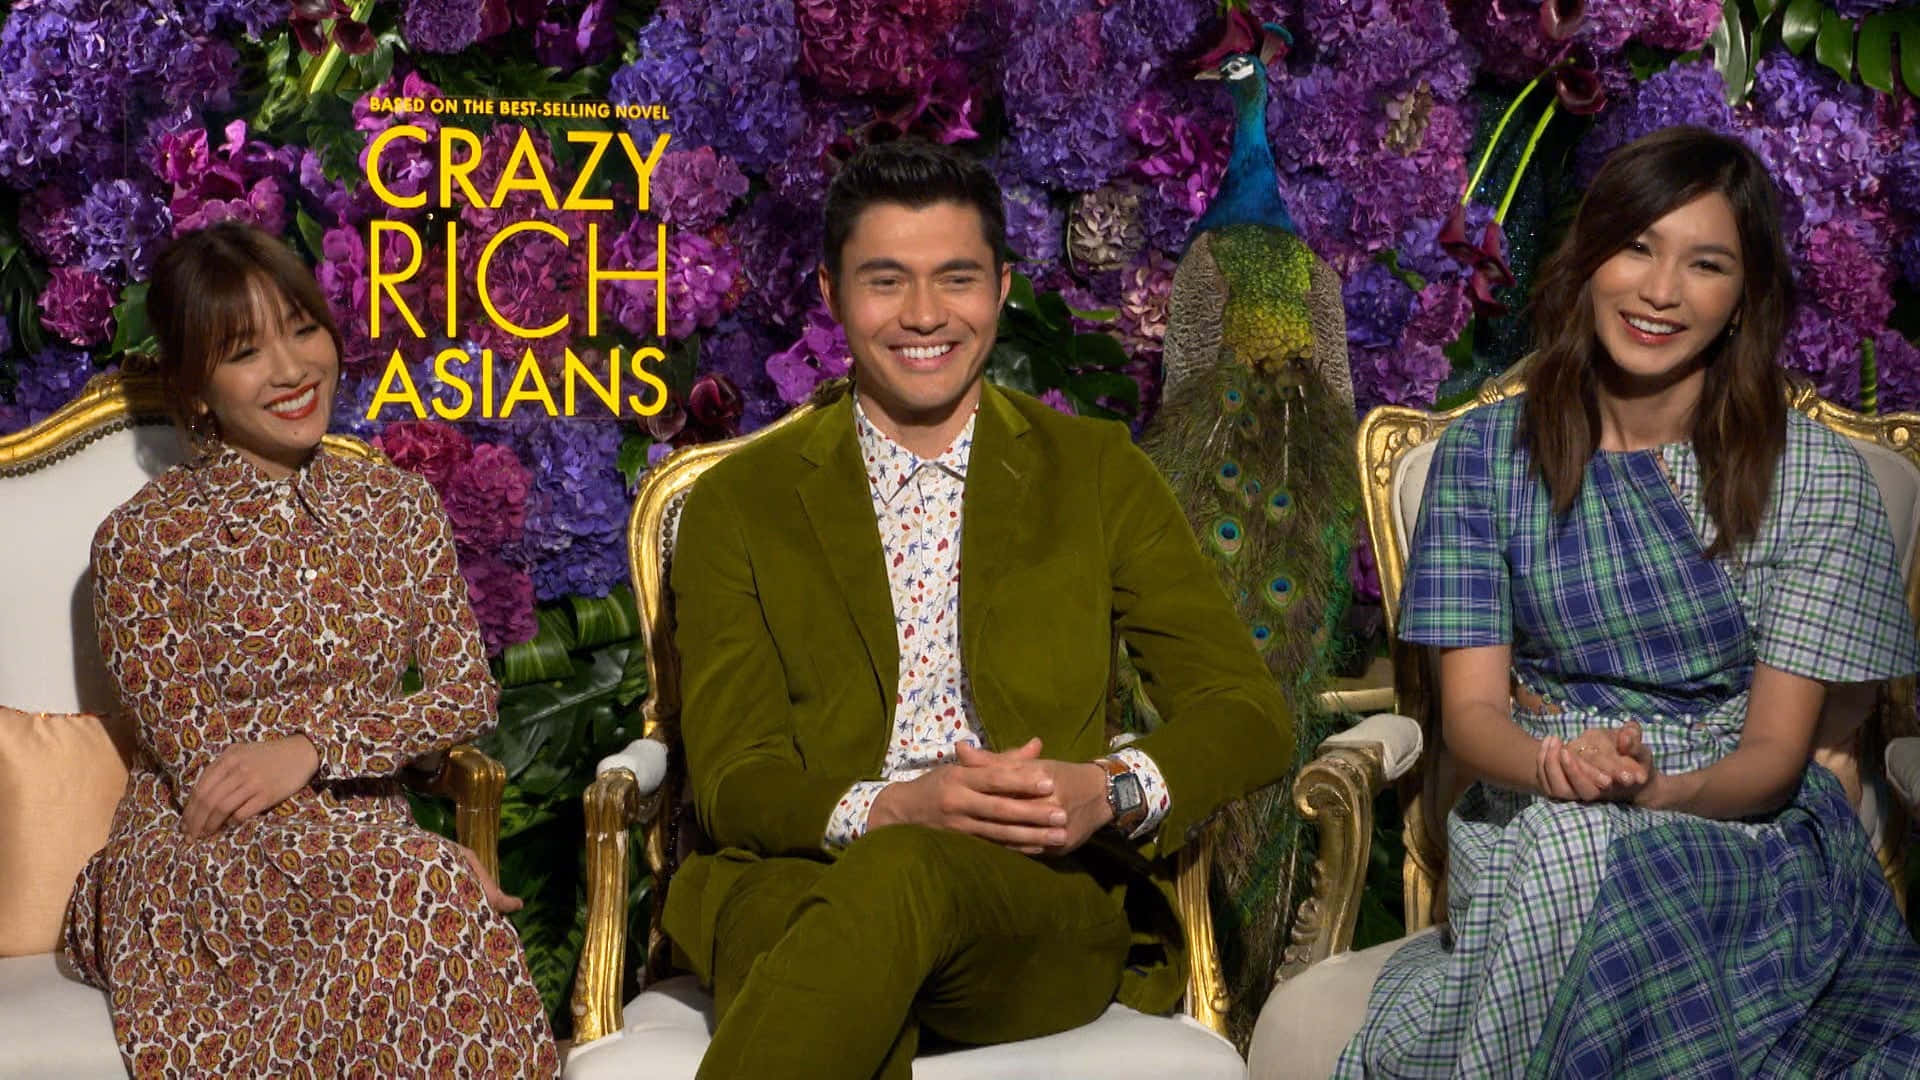 The Crazy Rich Asians cast during a private screening of the film.